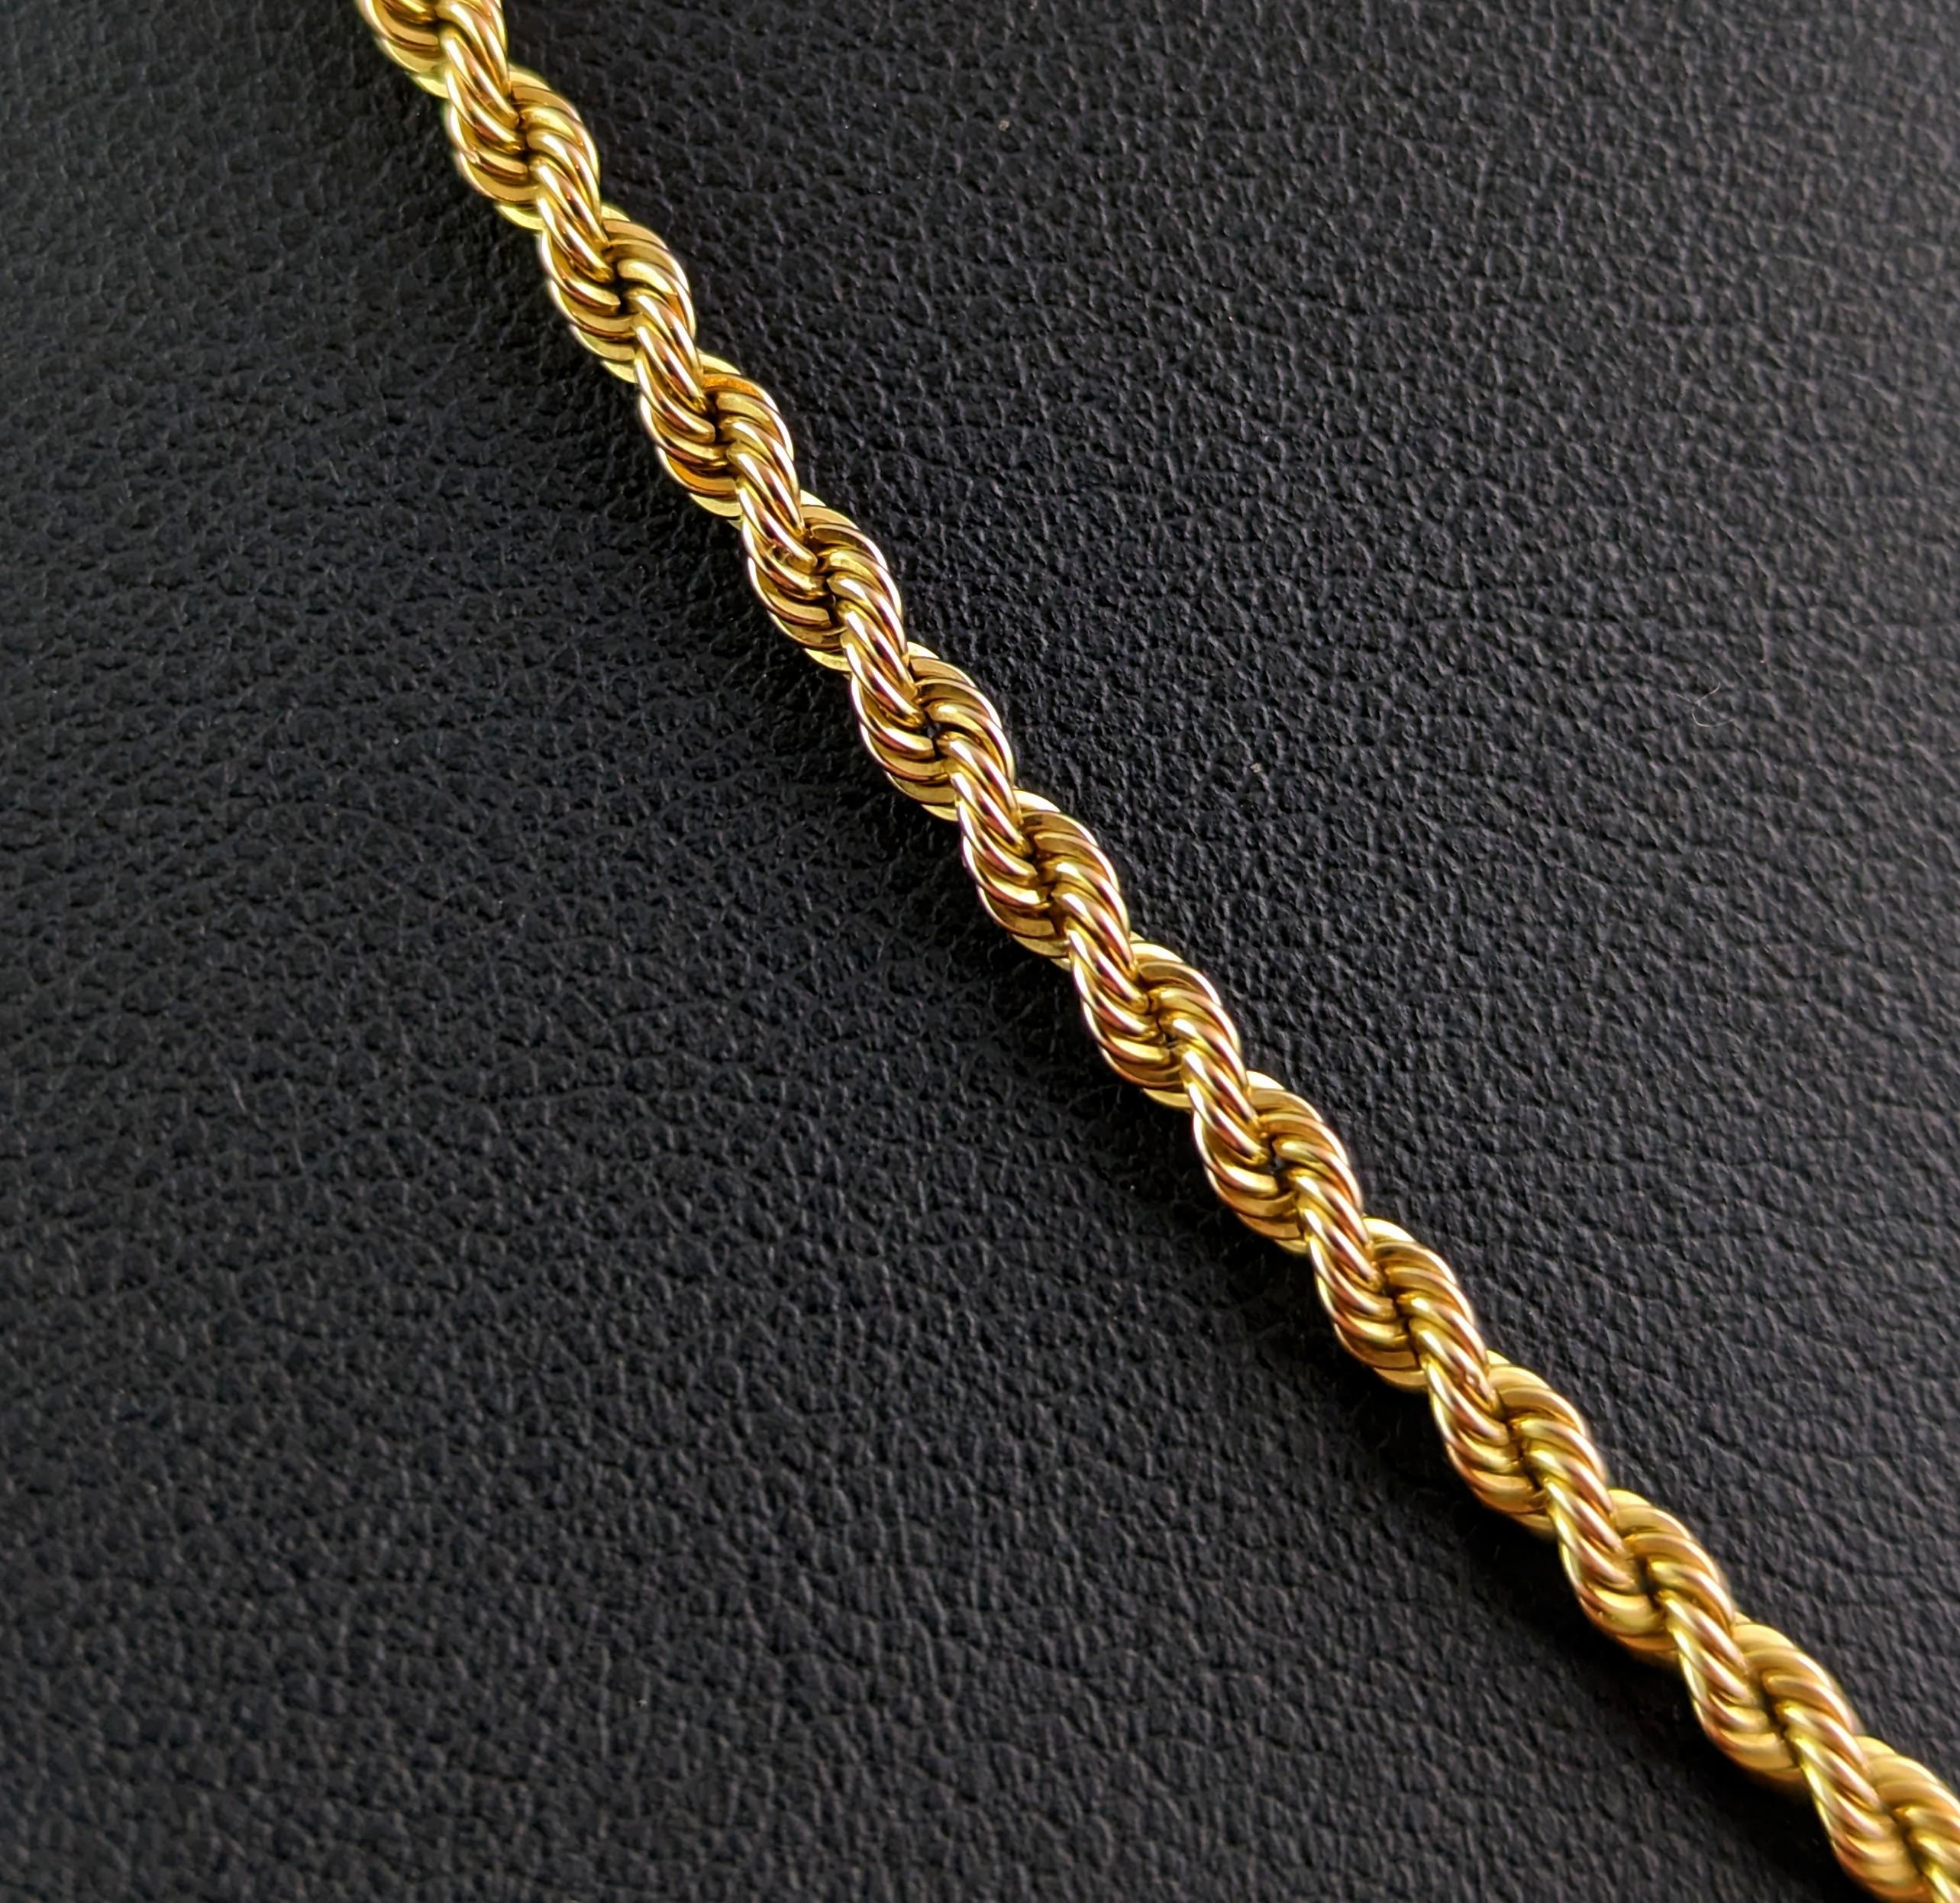 Vintage 9k yellow gold rope twist link chain necklace For Sale 1